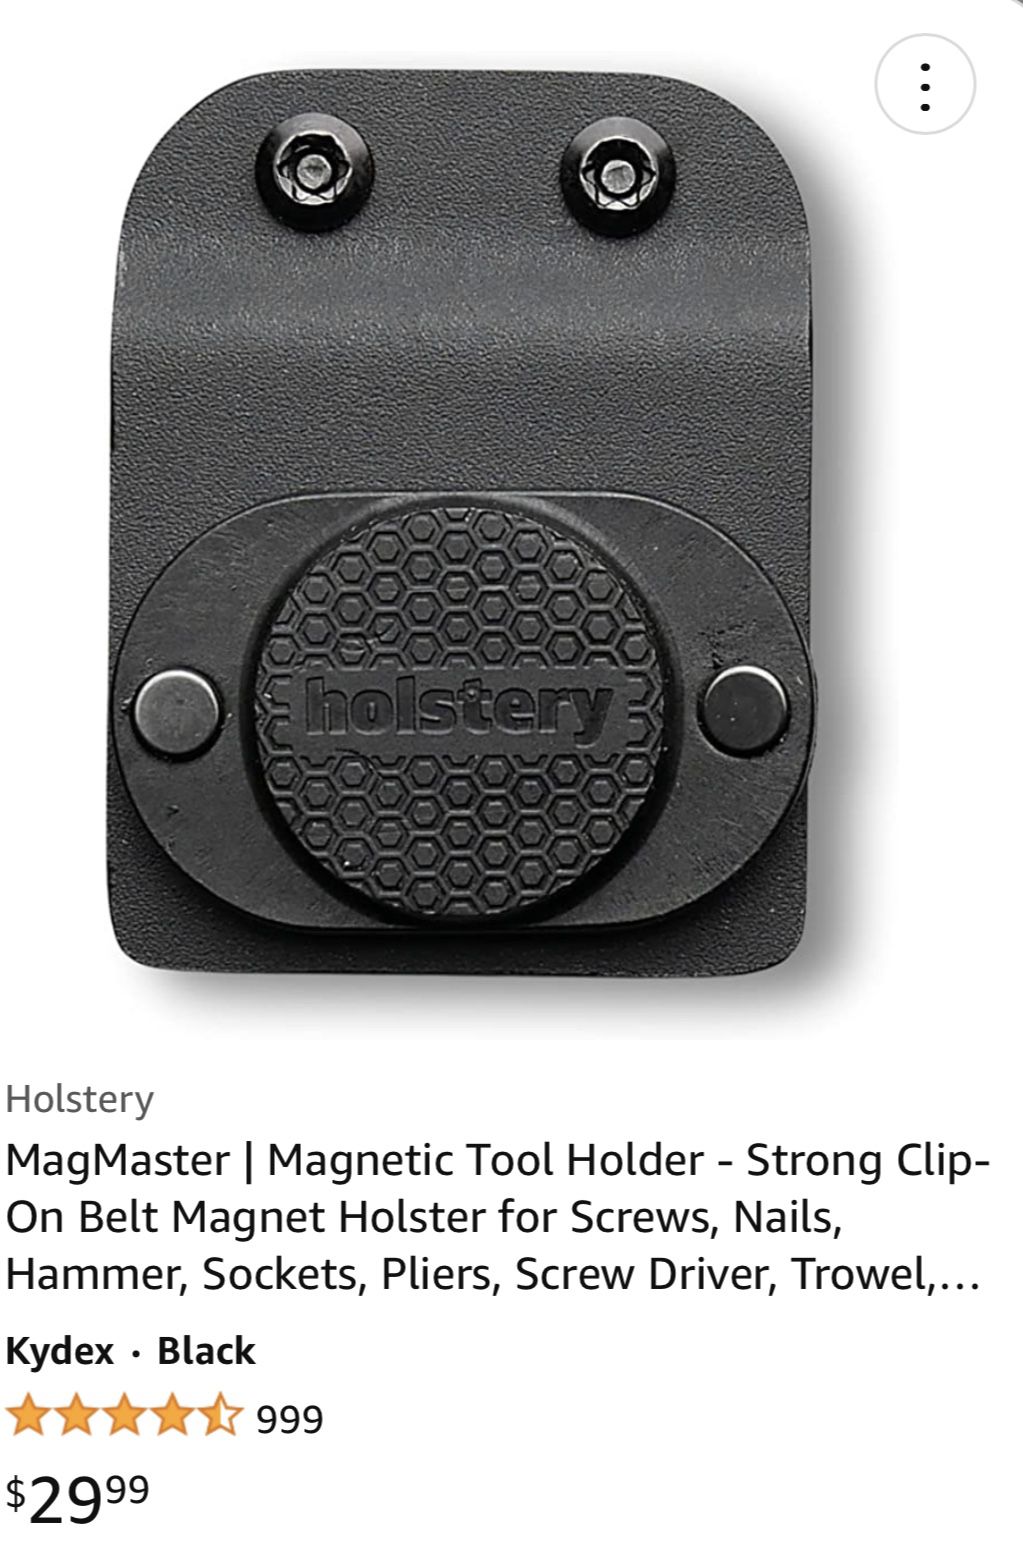 MagMaster | Magnetic Tool Holder - Strong Clip-On Belt Magnet Holster for Screws, Nails, Hammer, Sockets, Pliers, Screw Driver, Trowel, Drill Bit, Wre